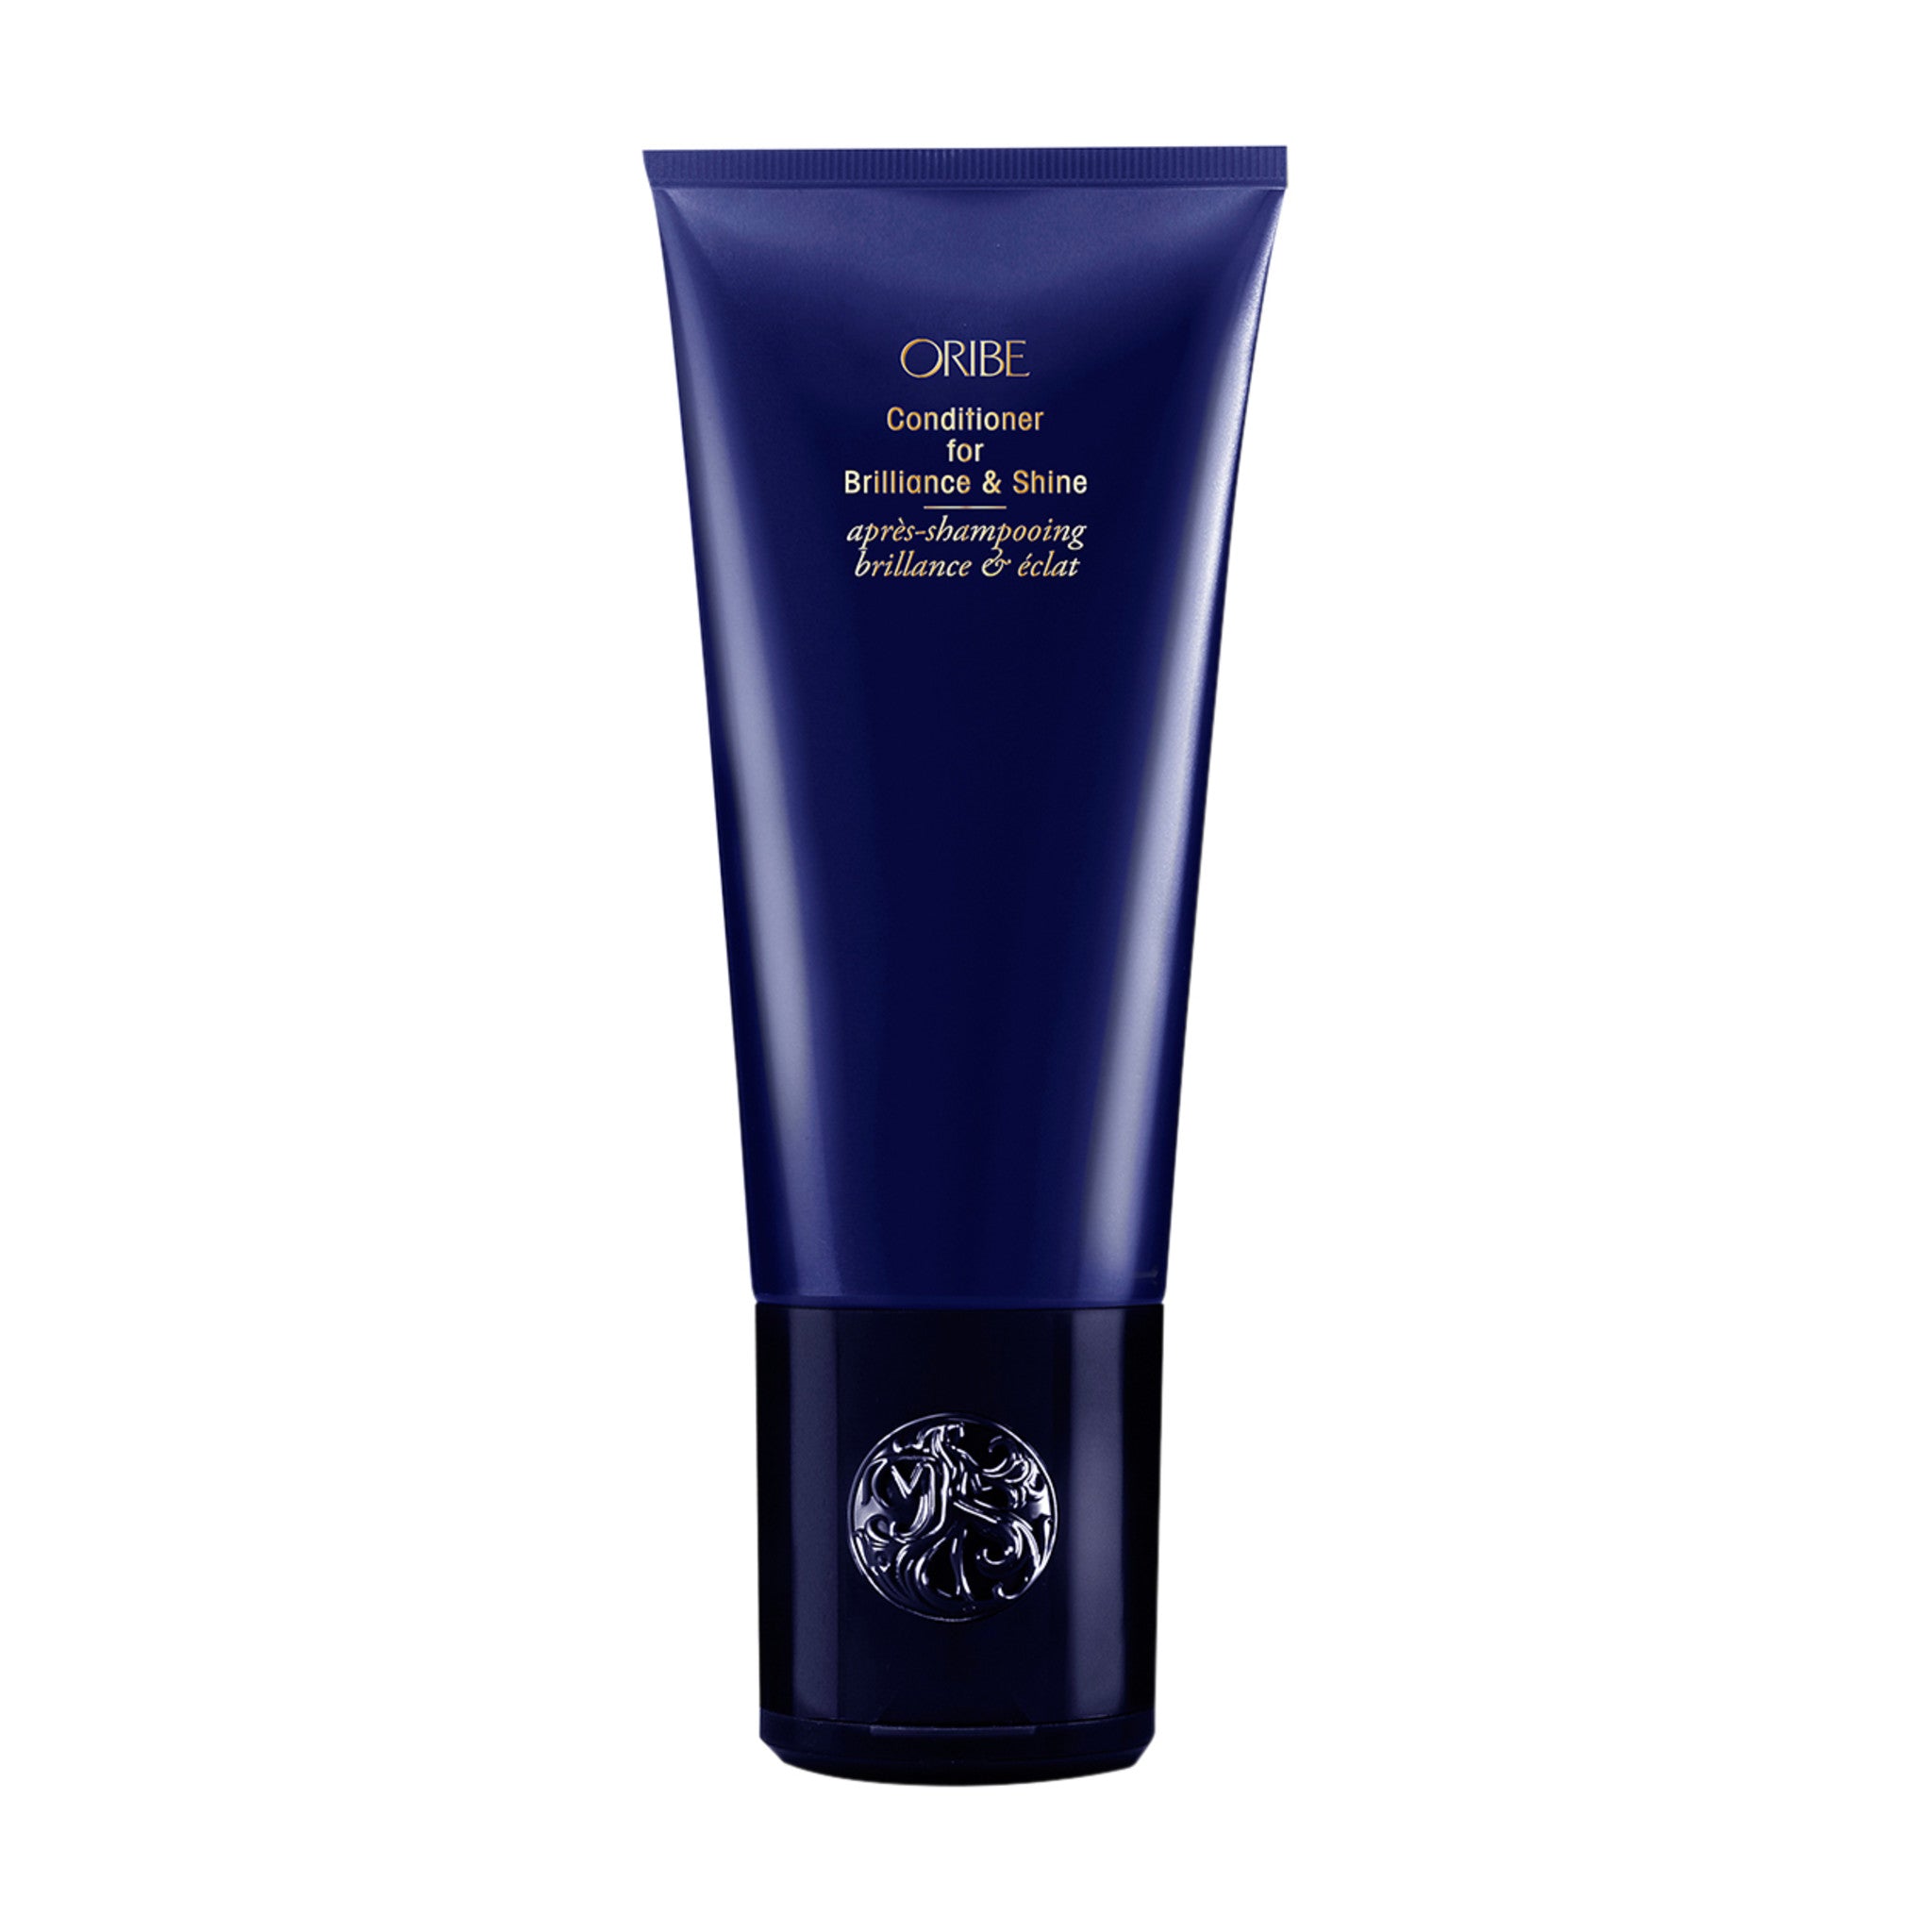 Oribe Conditioner For Brilliance and Shine Size variant: 6.8 oz main image.